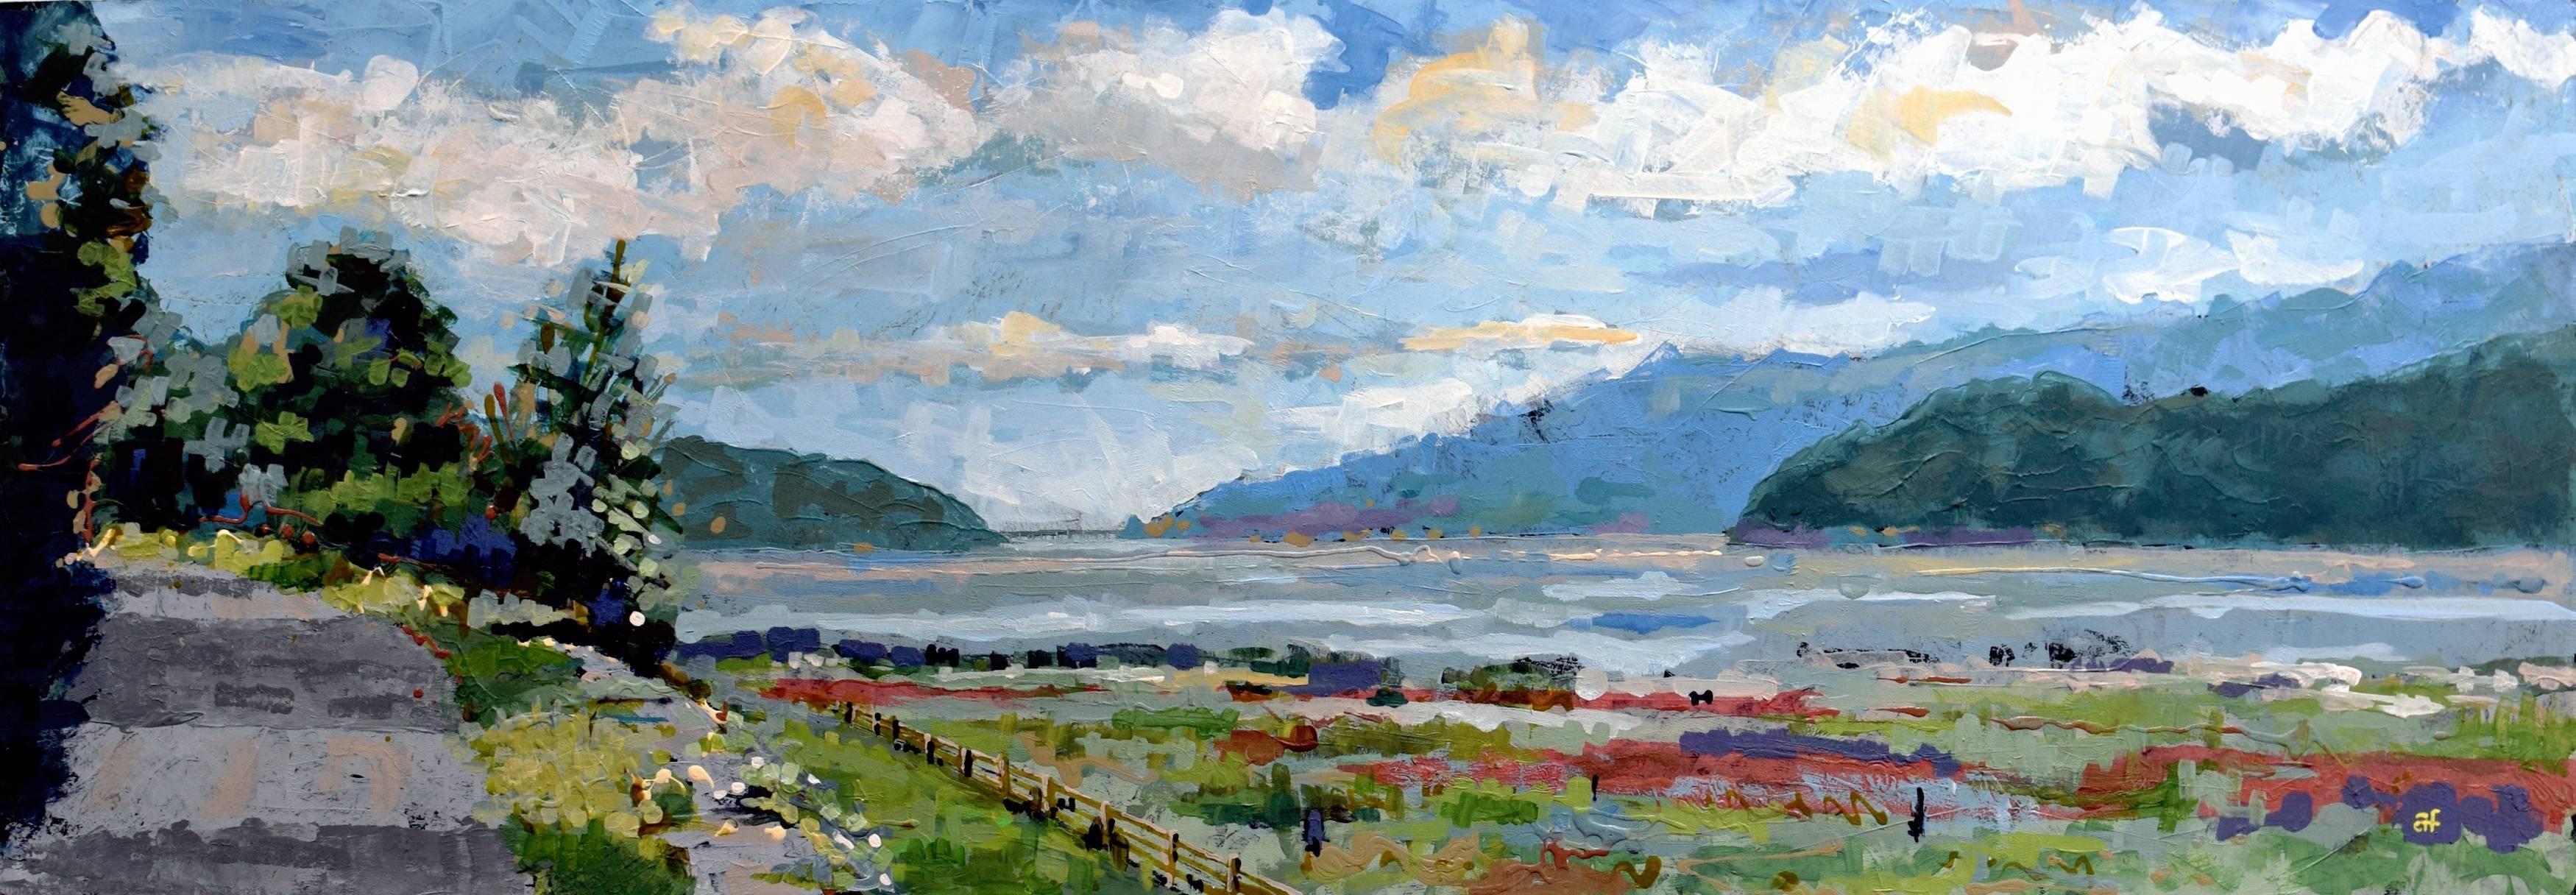 Andrew Francis Landscape Painting - Taith Mawddach: Contemporary British Landscape Oil Painting 